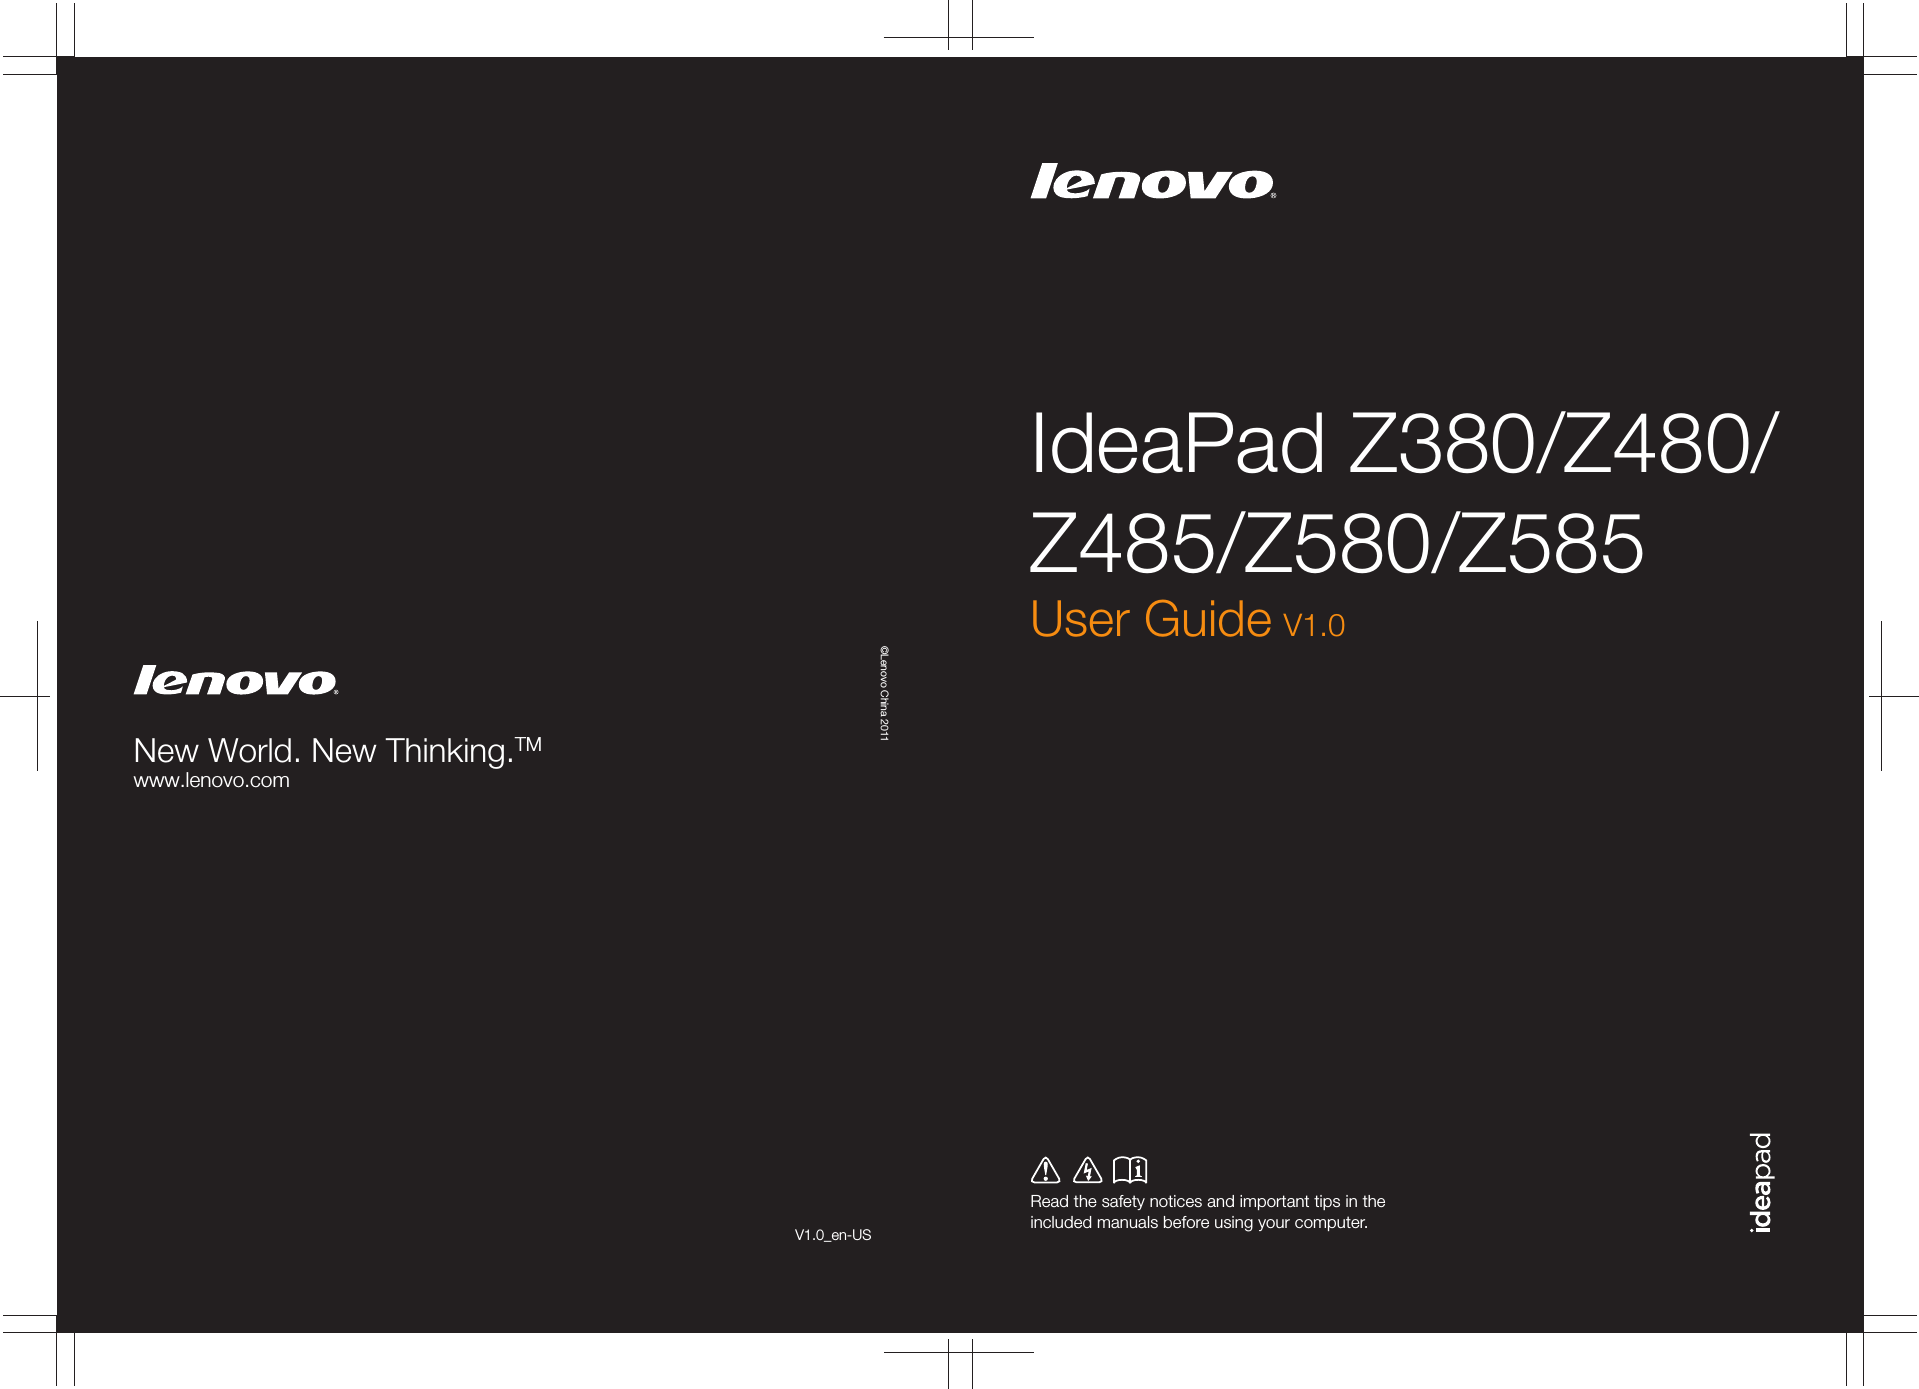 IdeaPad Z380/Z480/Z485/Z580/Z585Read the safety notices and important tips in the included manuals before using your computer.©Lenovo China 2011New World. New Thinking.TMwww.lenovo.comUser Guide V1.0V1.0_en-US